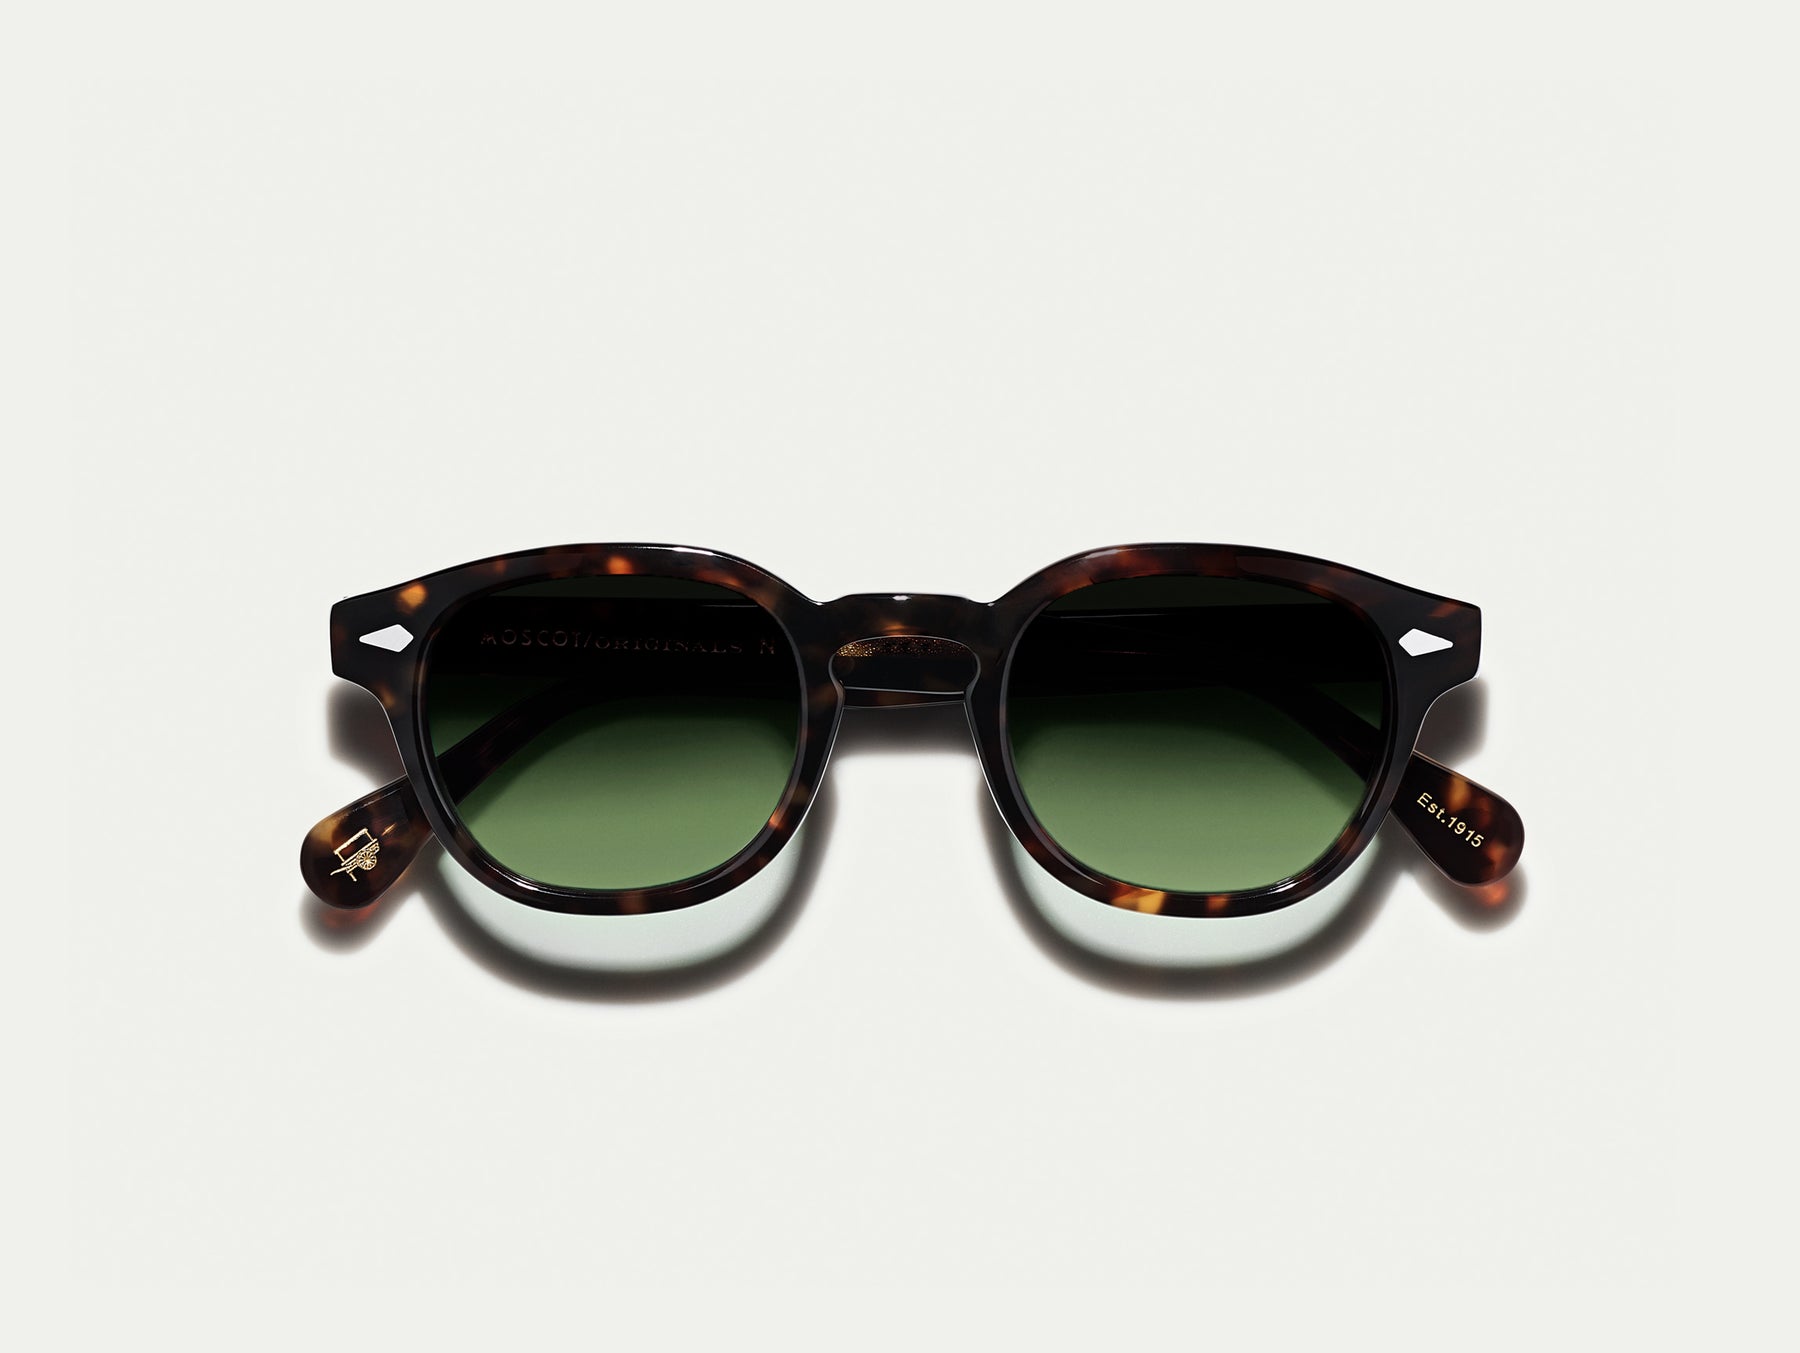 The LEMTOSH Tortoise with Forest Wood Tinted Lenses